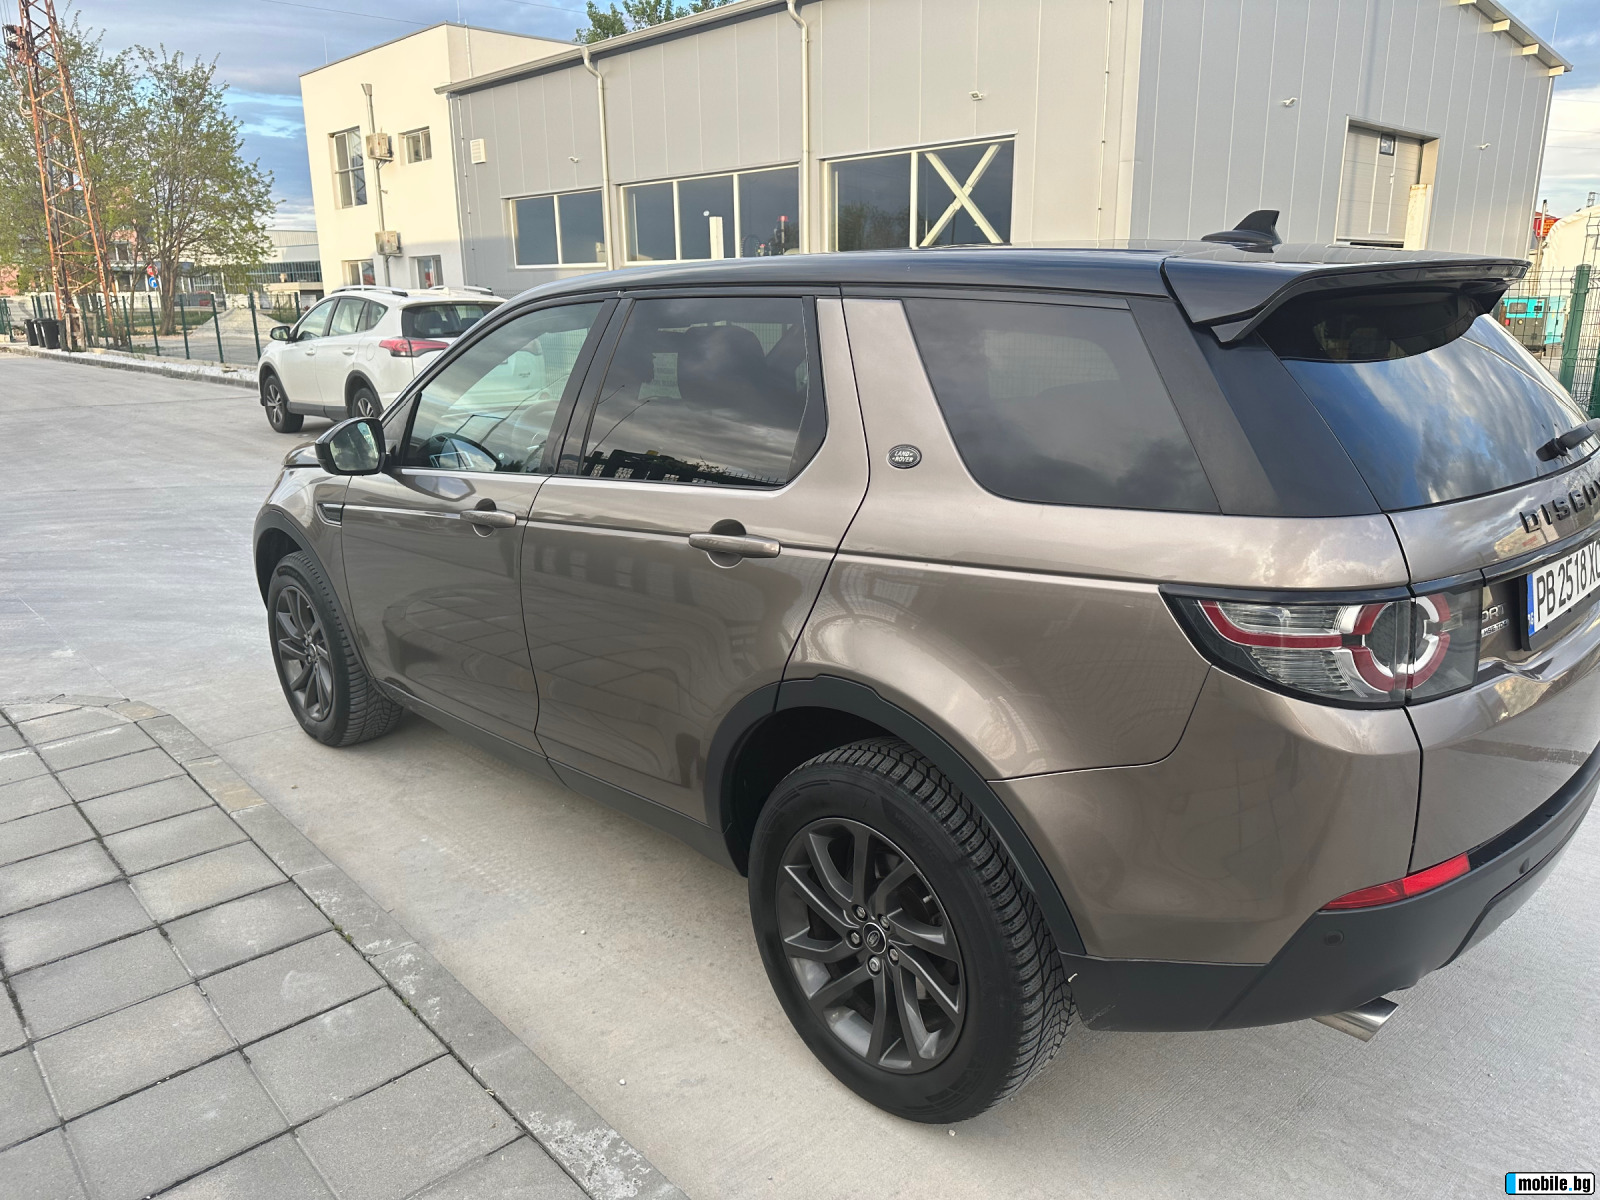 Land Rover Discovery SPORT 2.2d | Mobile.bg   12